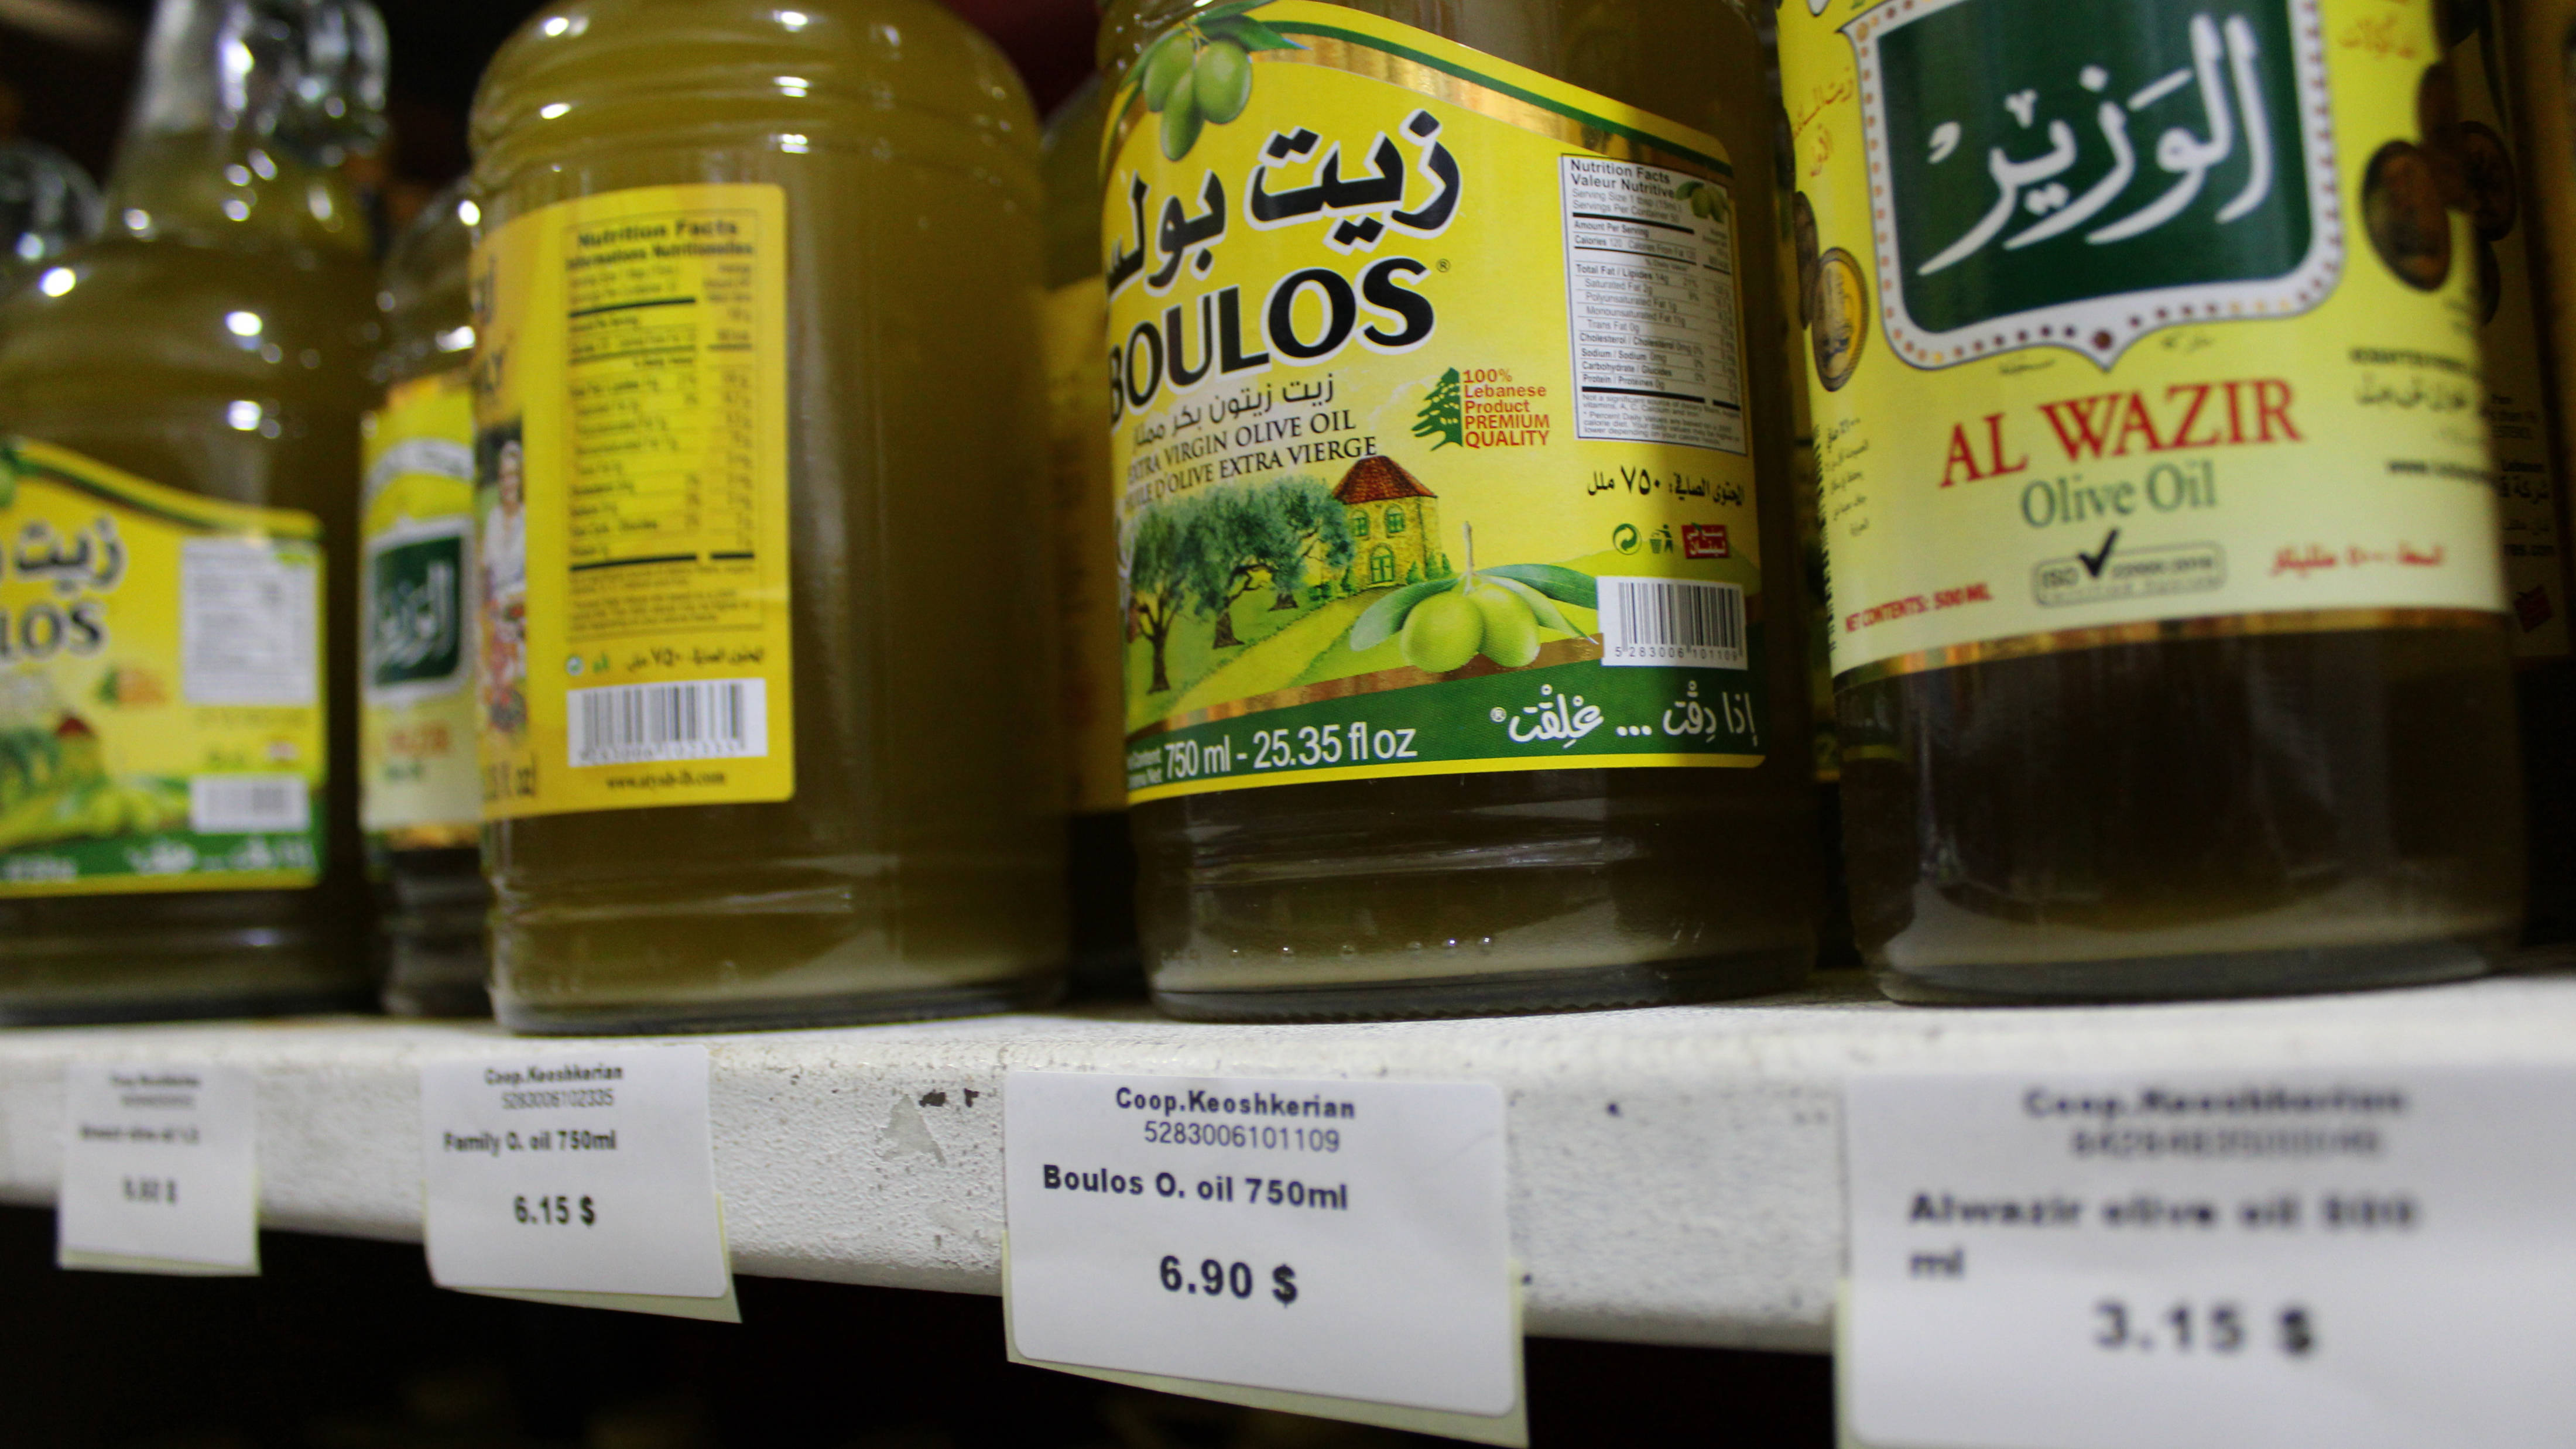 Earlier this month, the Lebanese government allowed supermarkets to price their products in dollars (MEE/Hanna Davis)